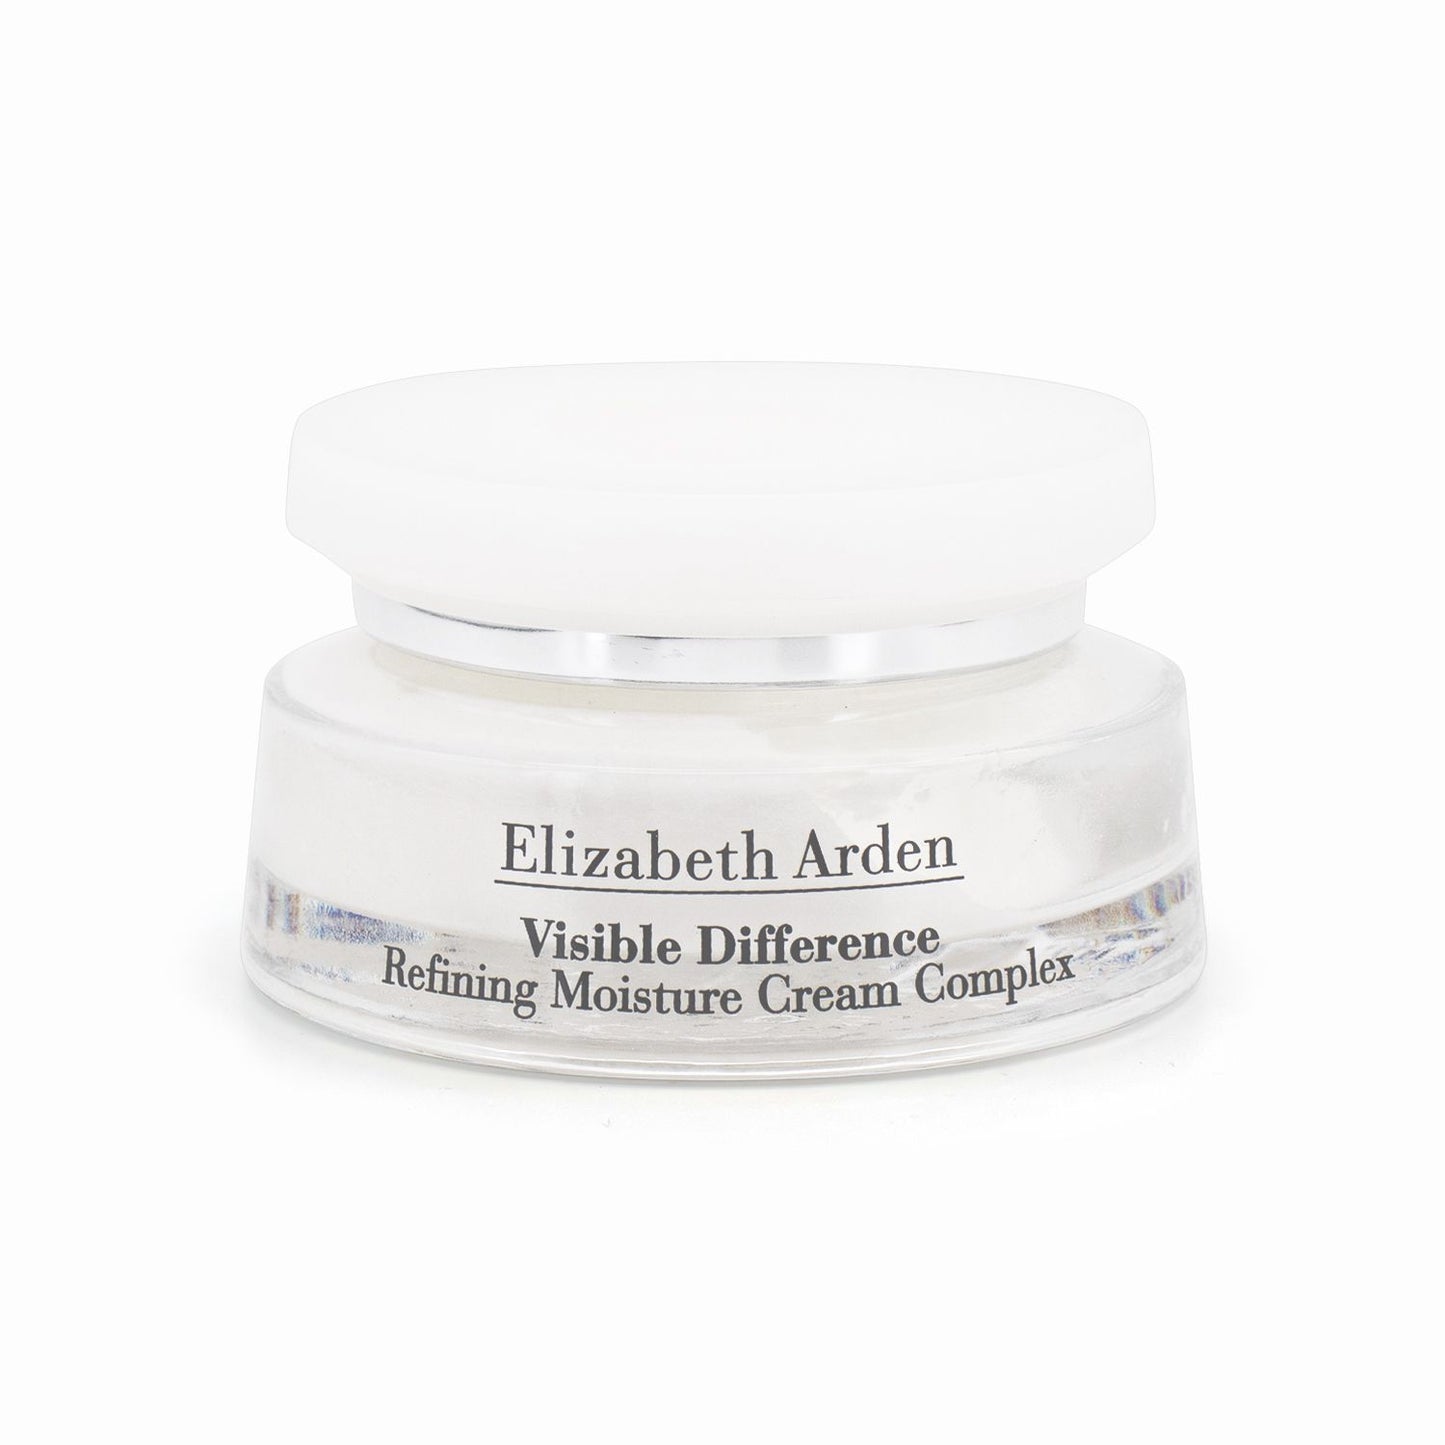 Elizabeth Arden Visible Difference Refining Moisture Cream 75ml - Imperfect Box - This is Beauty UK